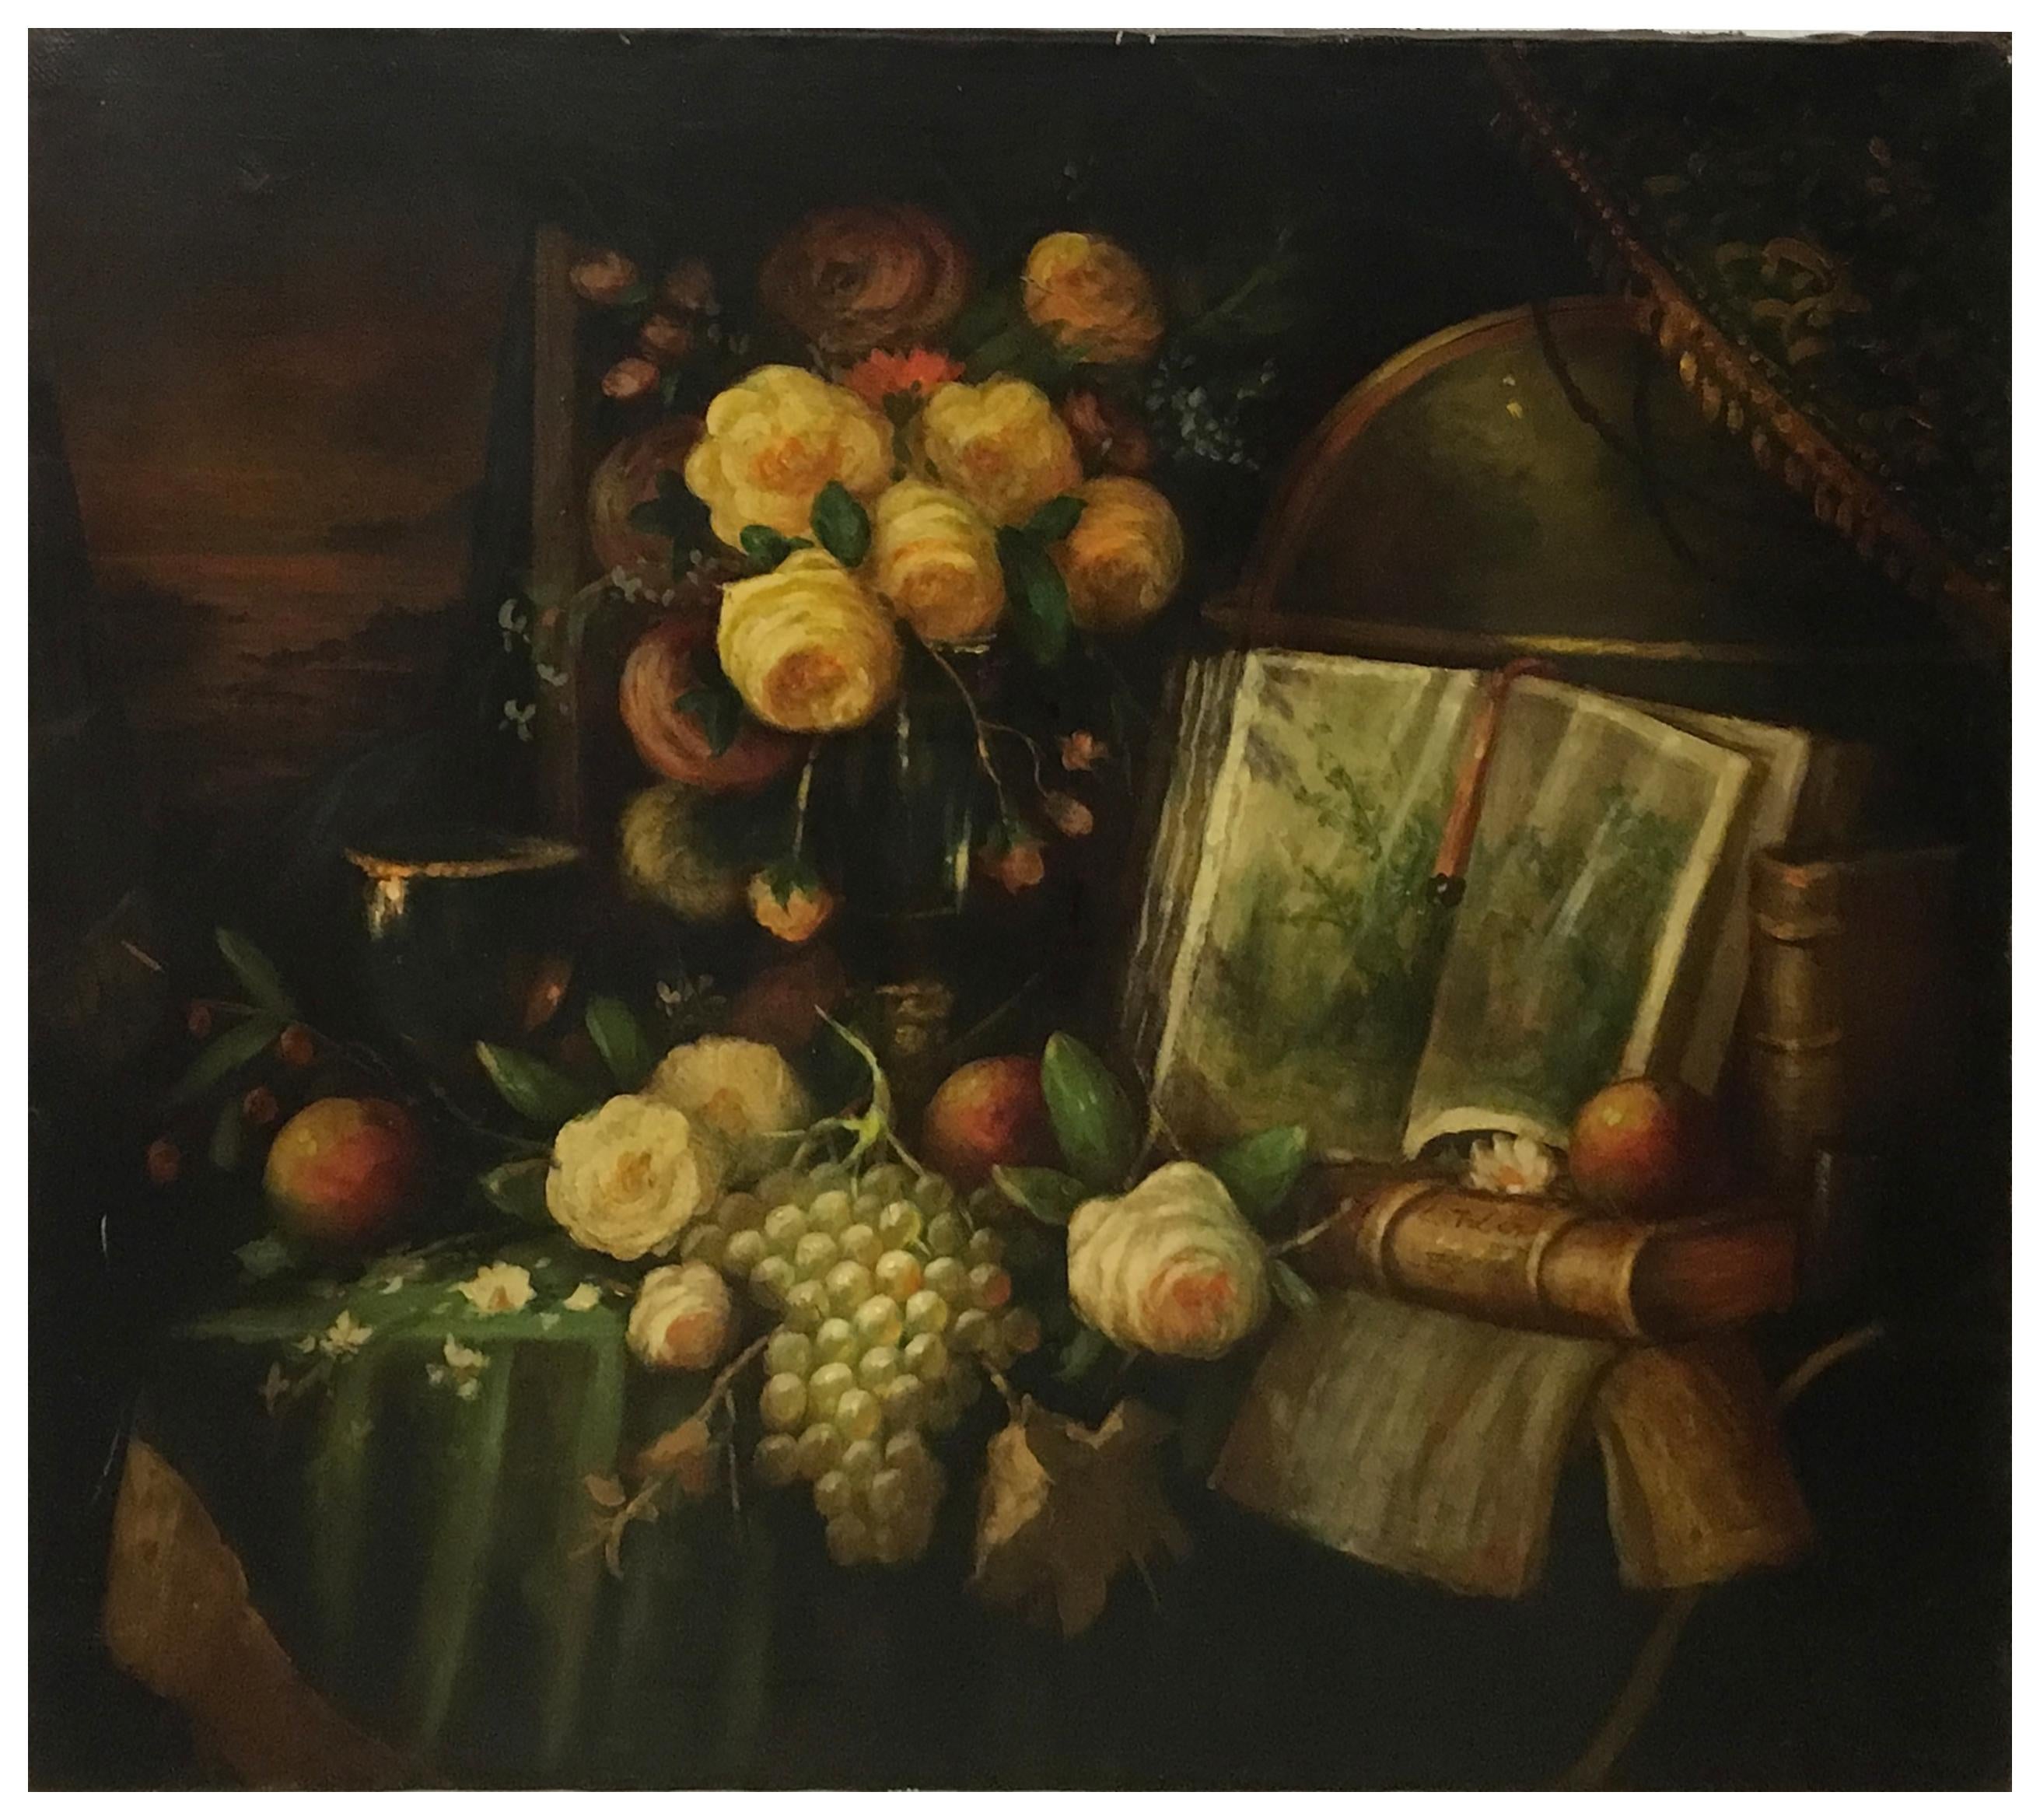 STILL LIFE - Oil on canvas cm. 80x90 by Massimo Reggiani, Italy 2007
The origins of still life can be found in Dutch painting. At the beginning of Dutch painting, artists included additional elements in their religious compositions, depicting them